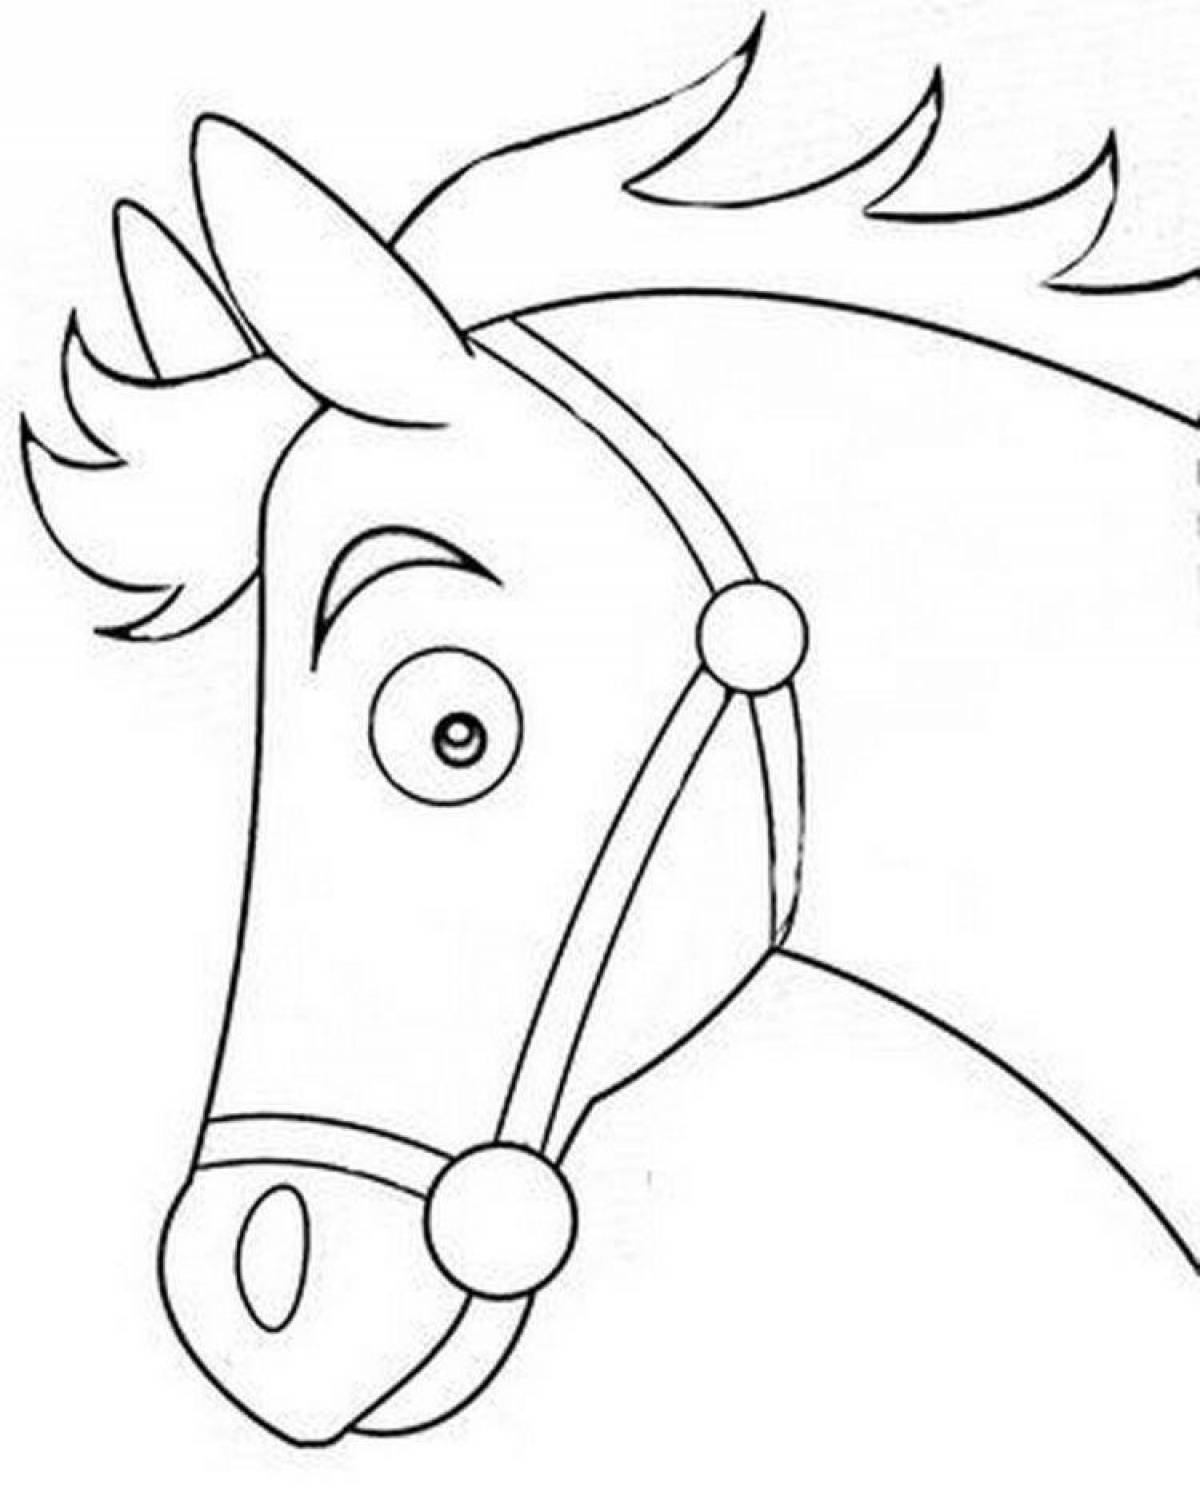 Exalted horse head coloring page